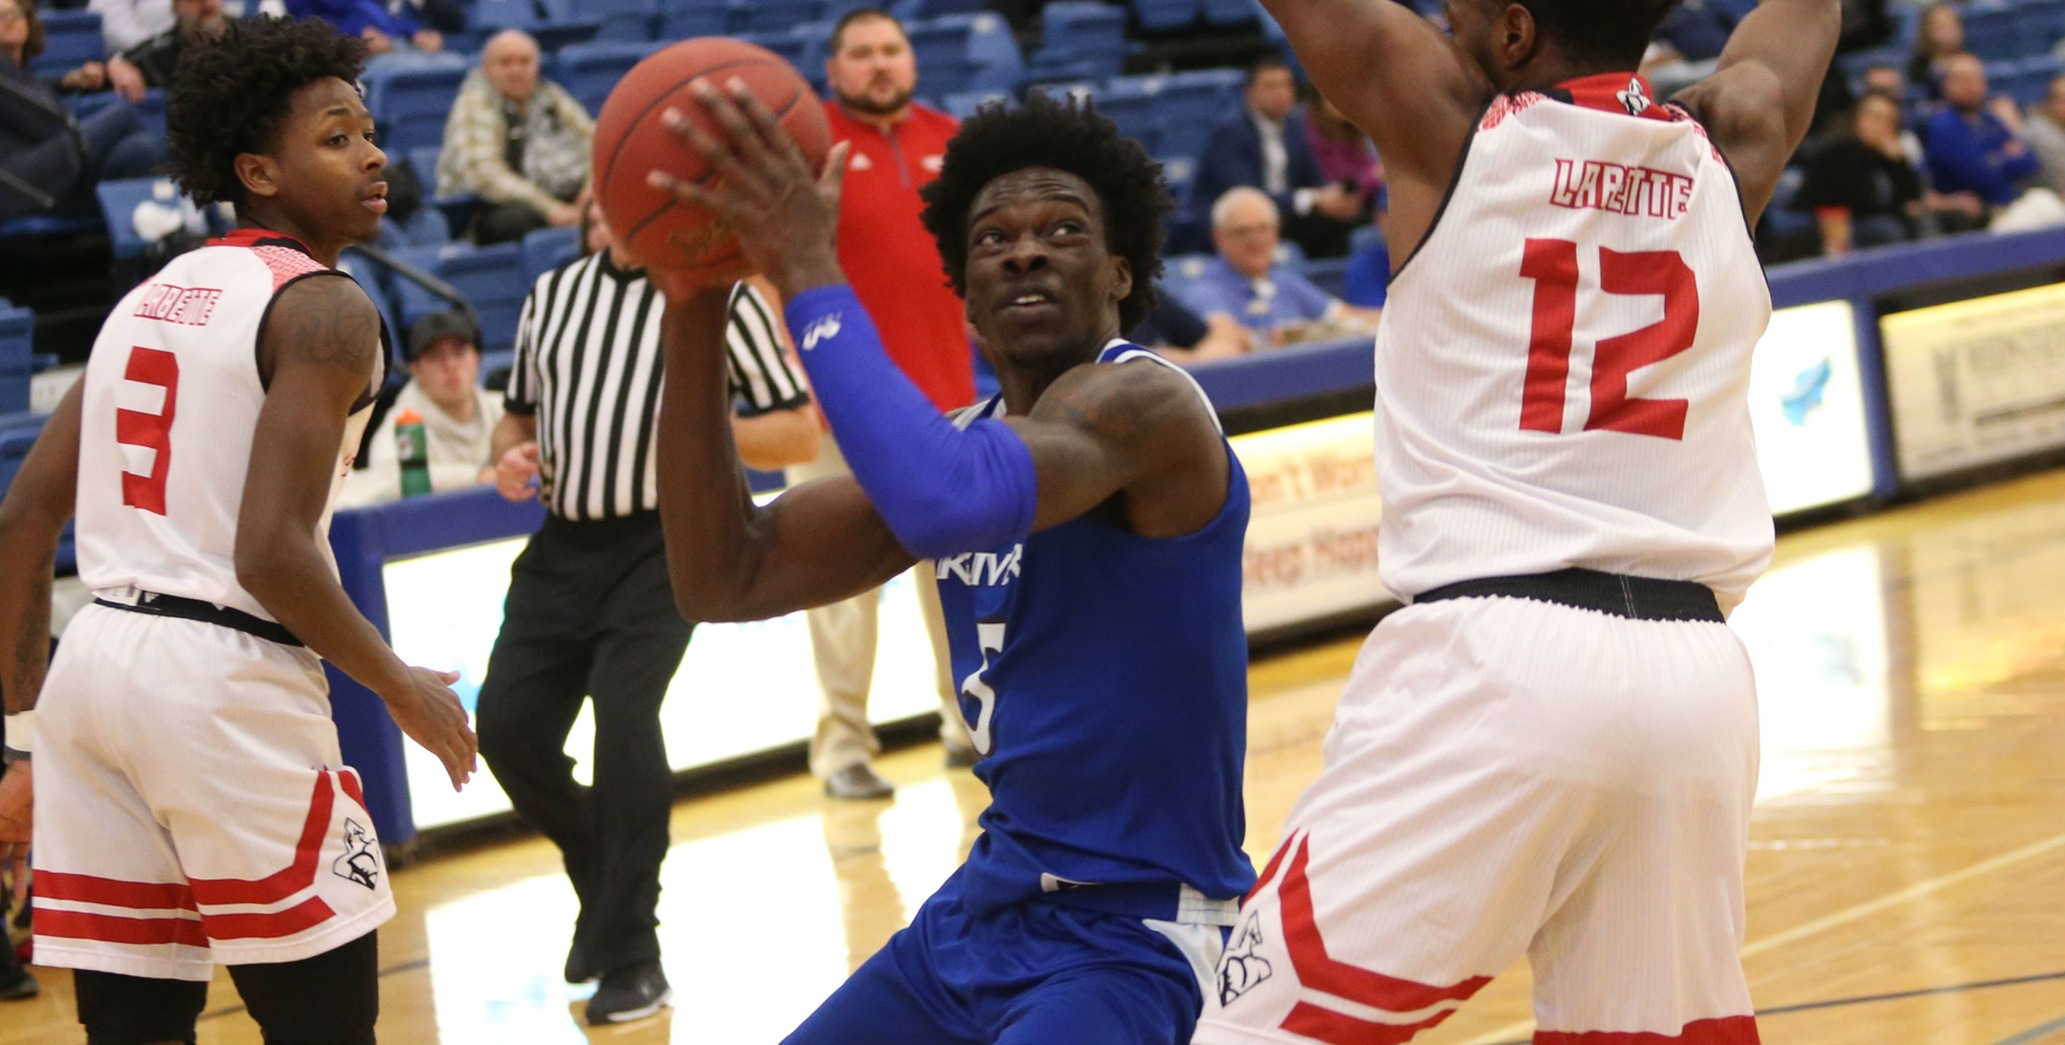 Travon Broadway and his Iowa Western teammates collected their 15th win of the season with a 101-57 road victory Tuesday evening (1/15/19) in New Providence, IA.